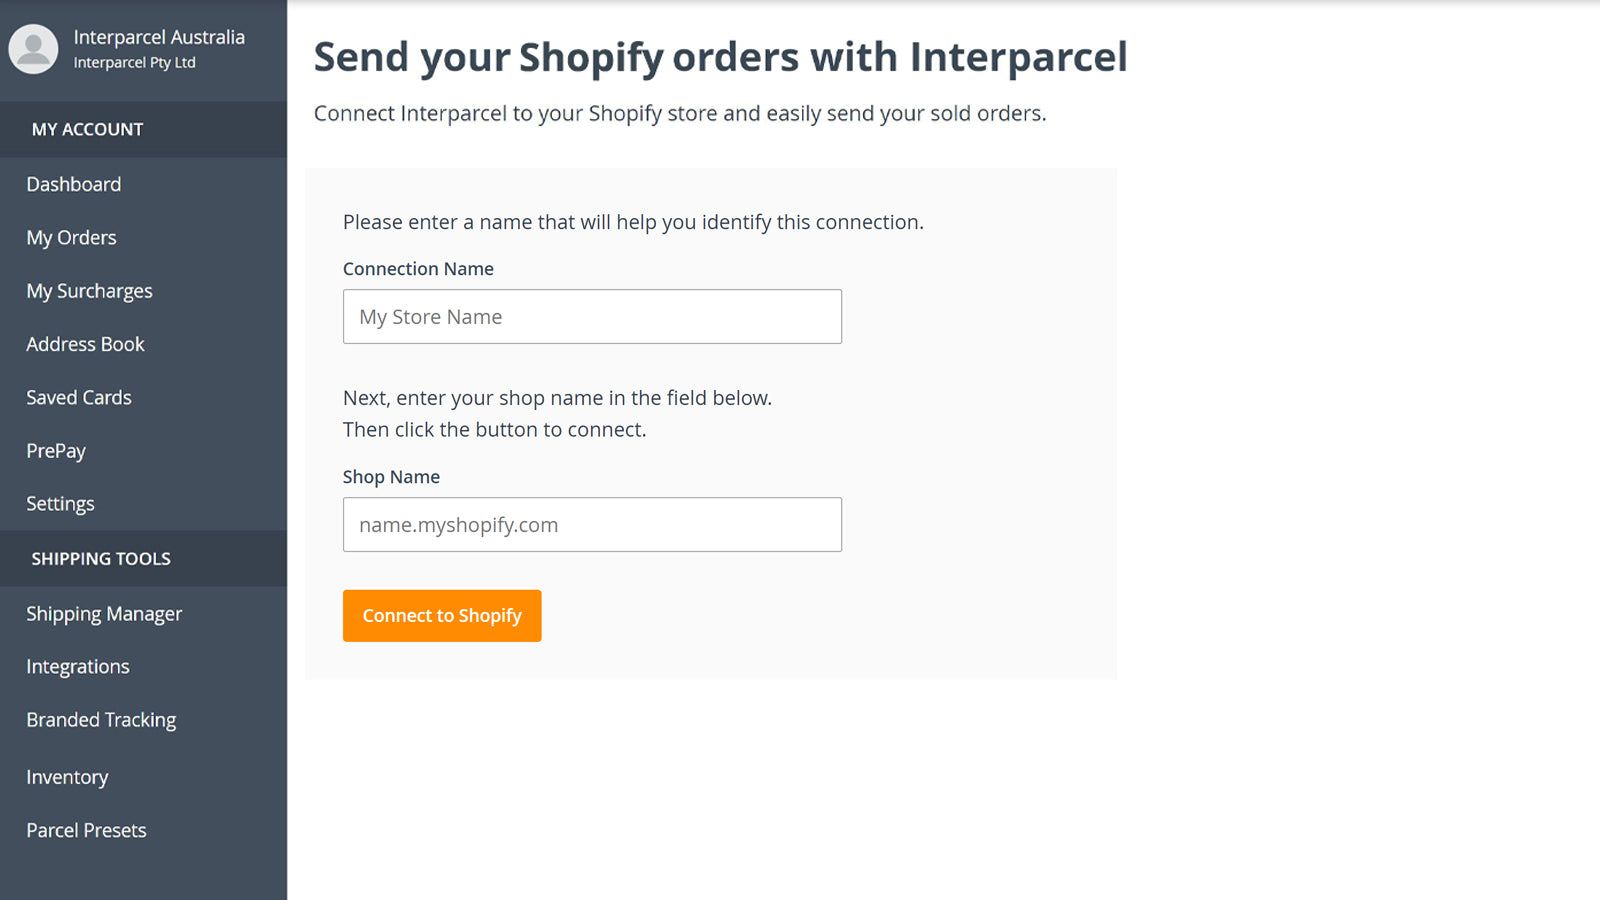 Simple and Easy Integration with Your Shopify Store 